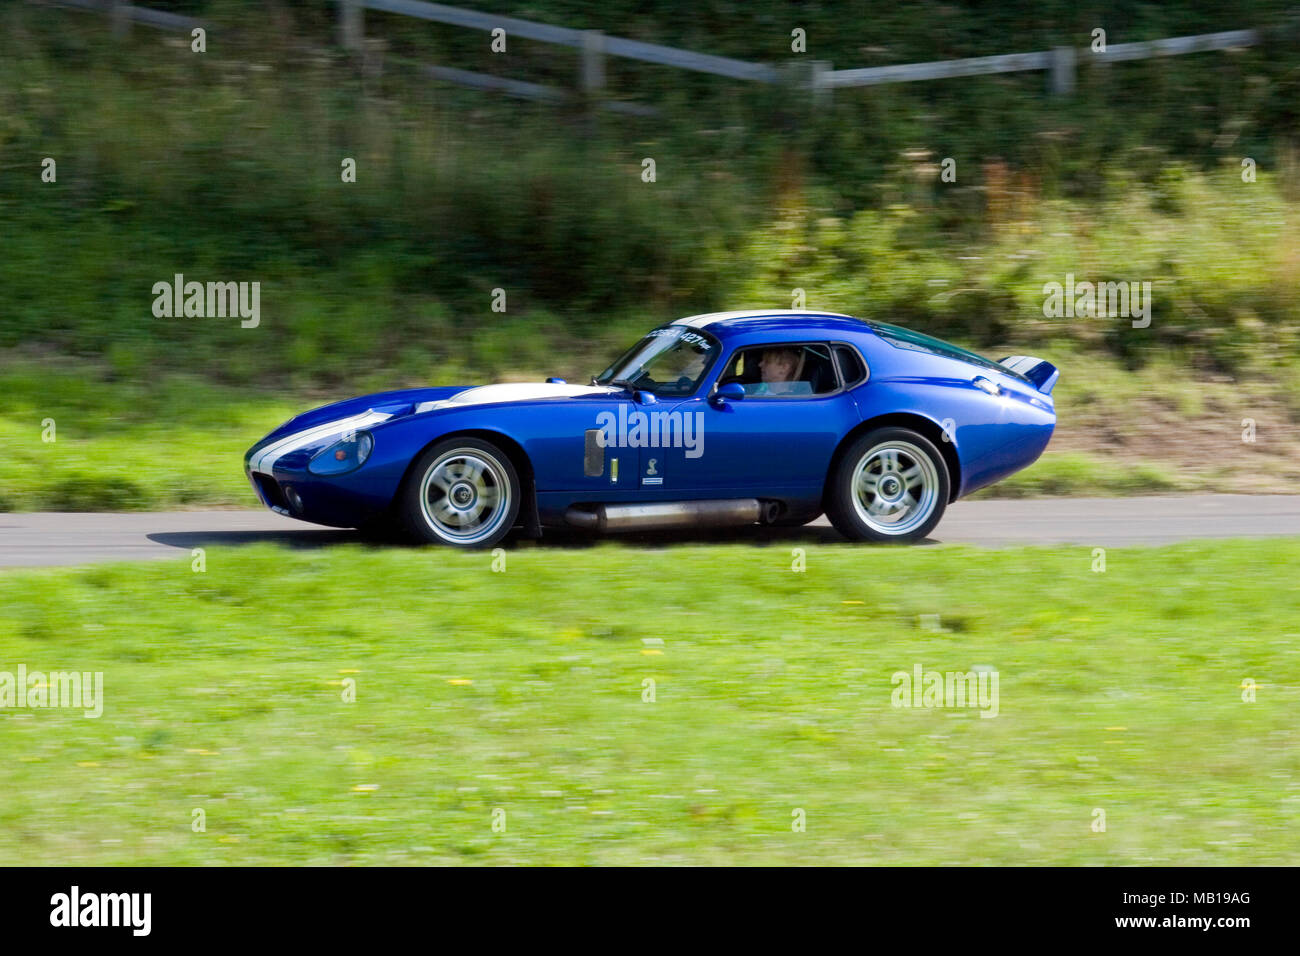 Blue Shelby Daytona Coupe 427 classic and rare American sportscar driving fast in profile (side view). Stock Photo